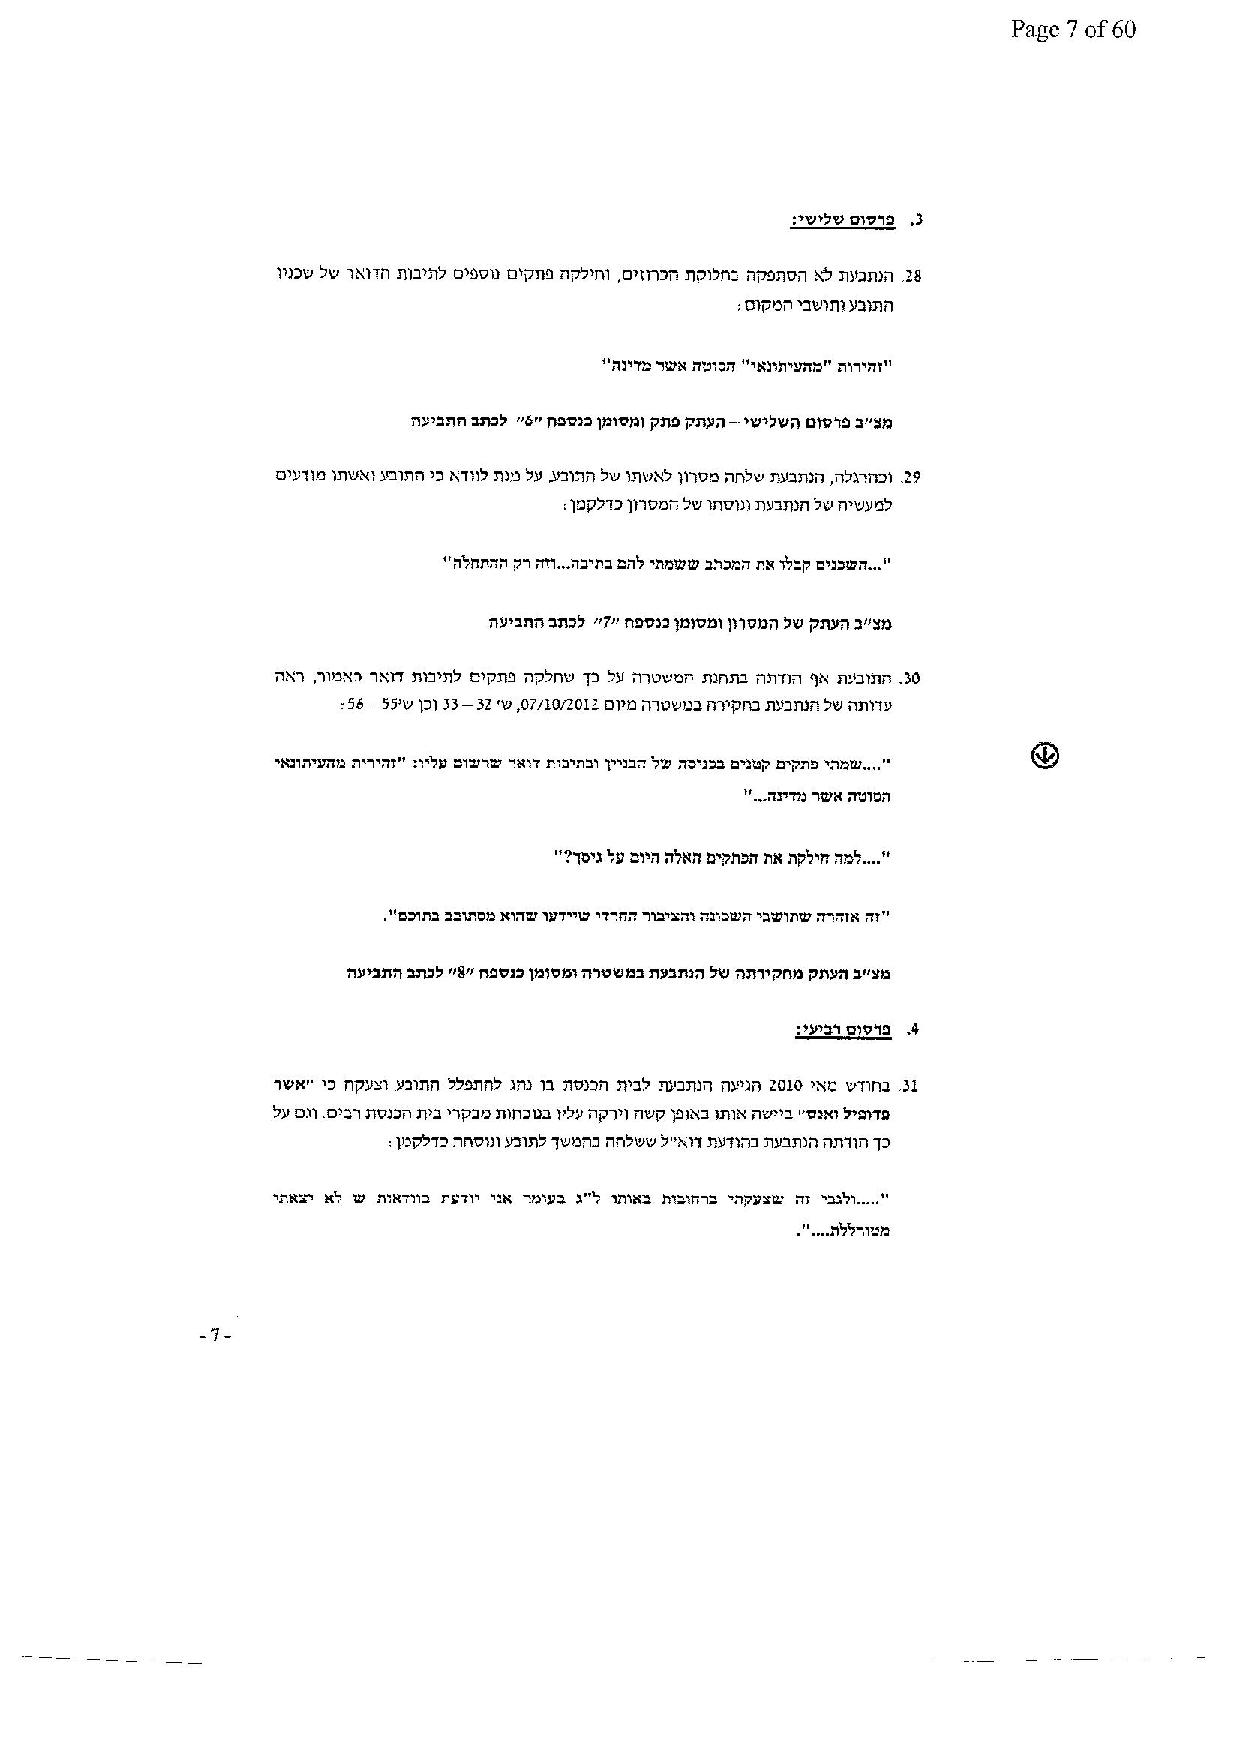 document-page-007